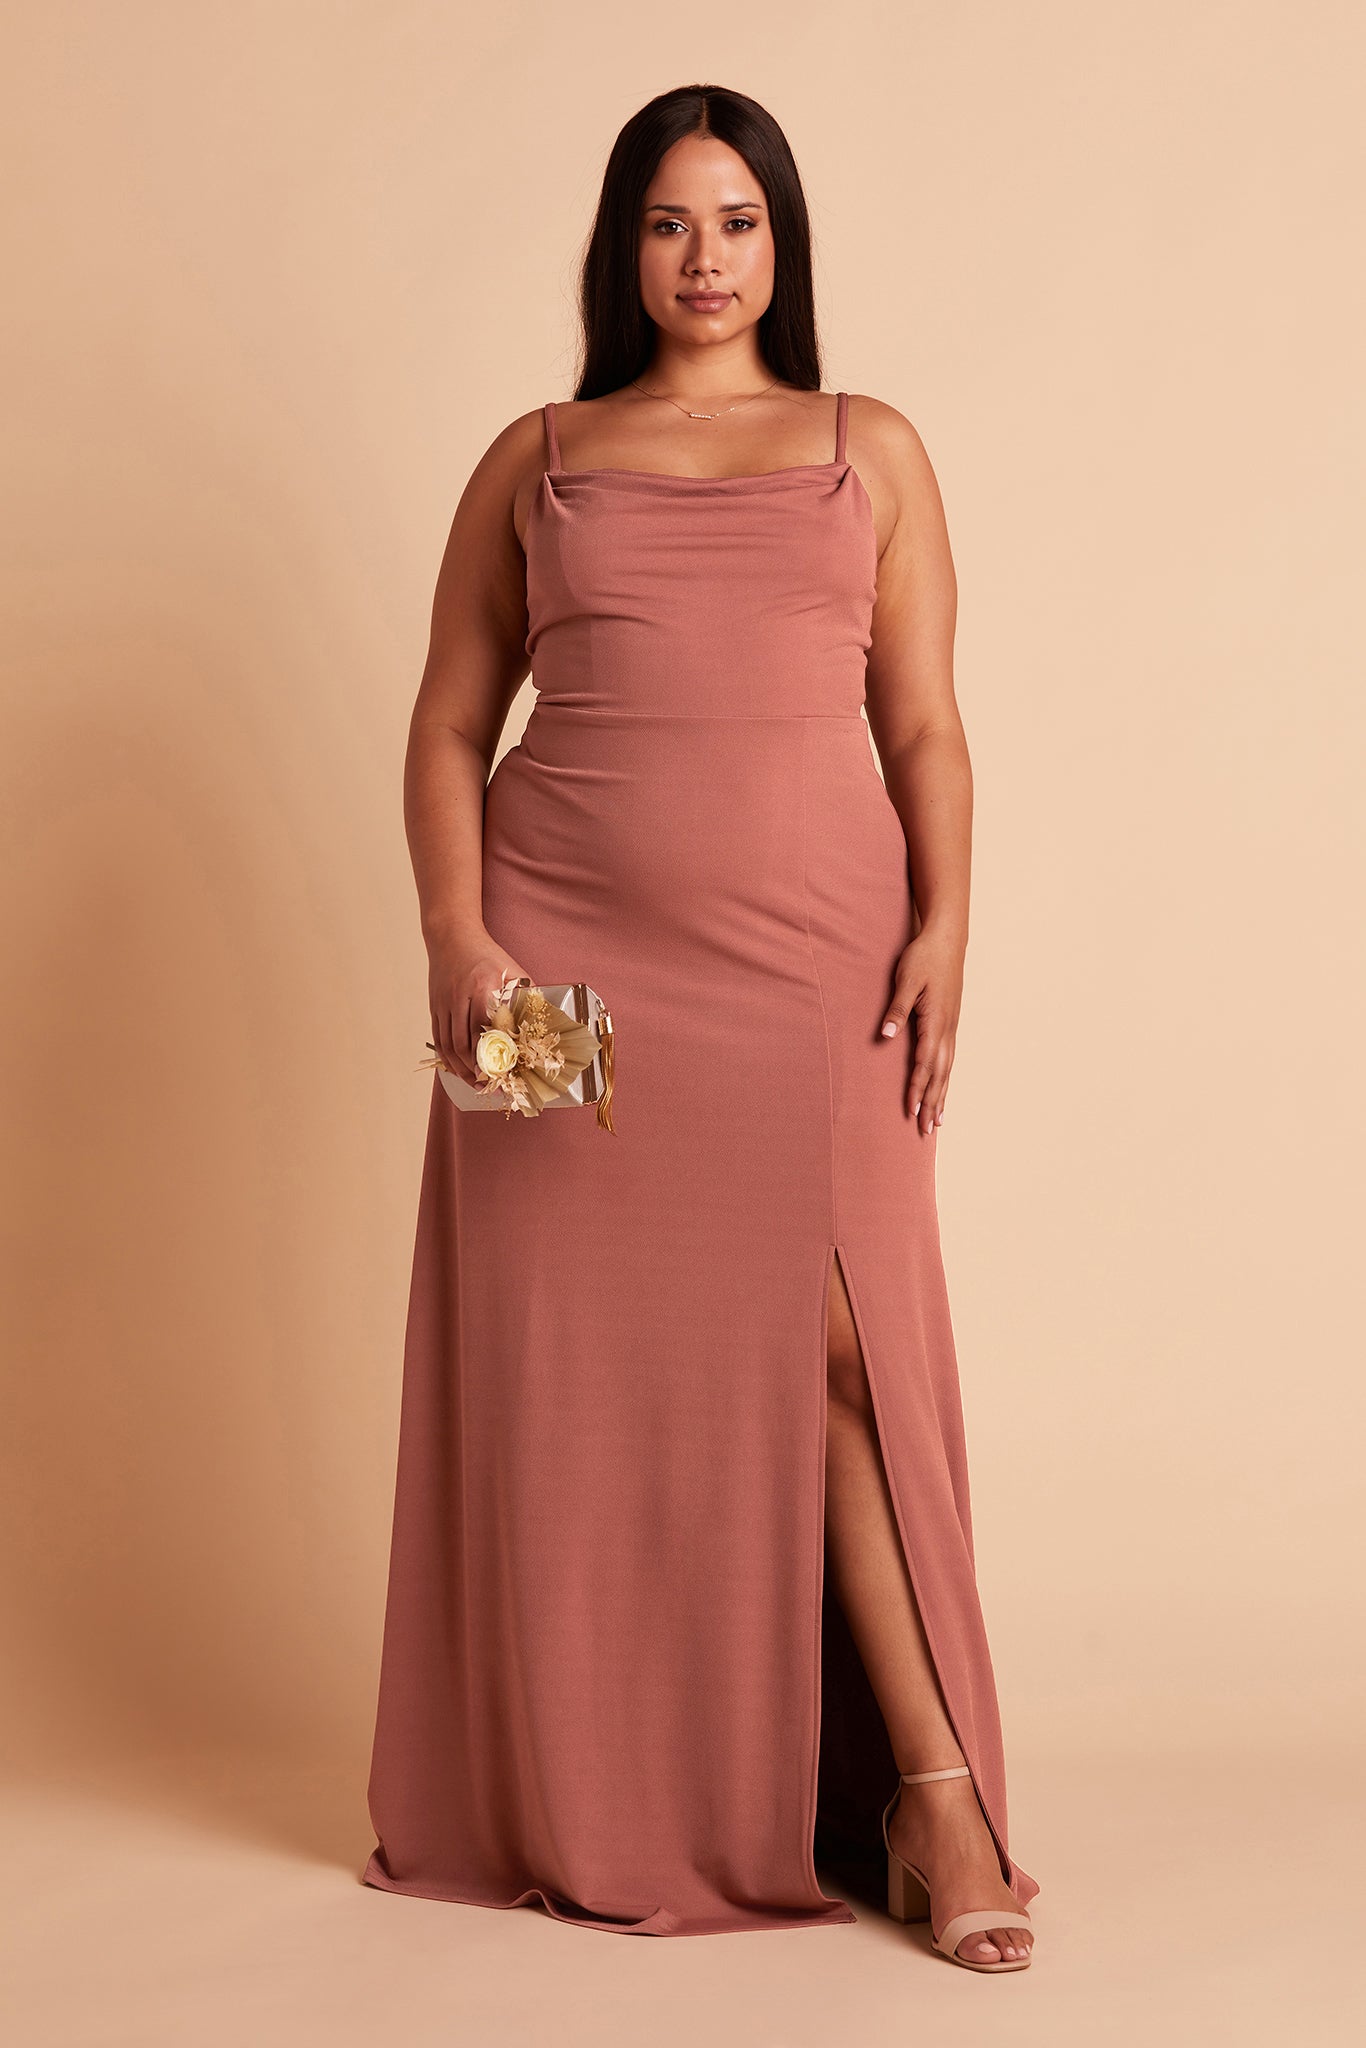 Ash plus size bridesmaid dress with slit in desert rose crepe by Birdy Grey, front view